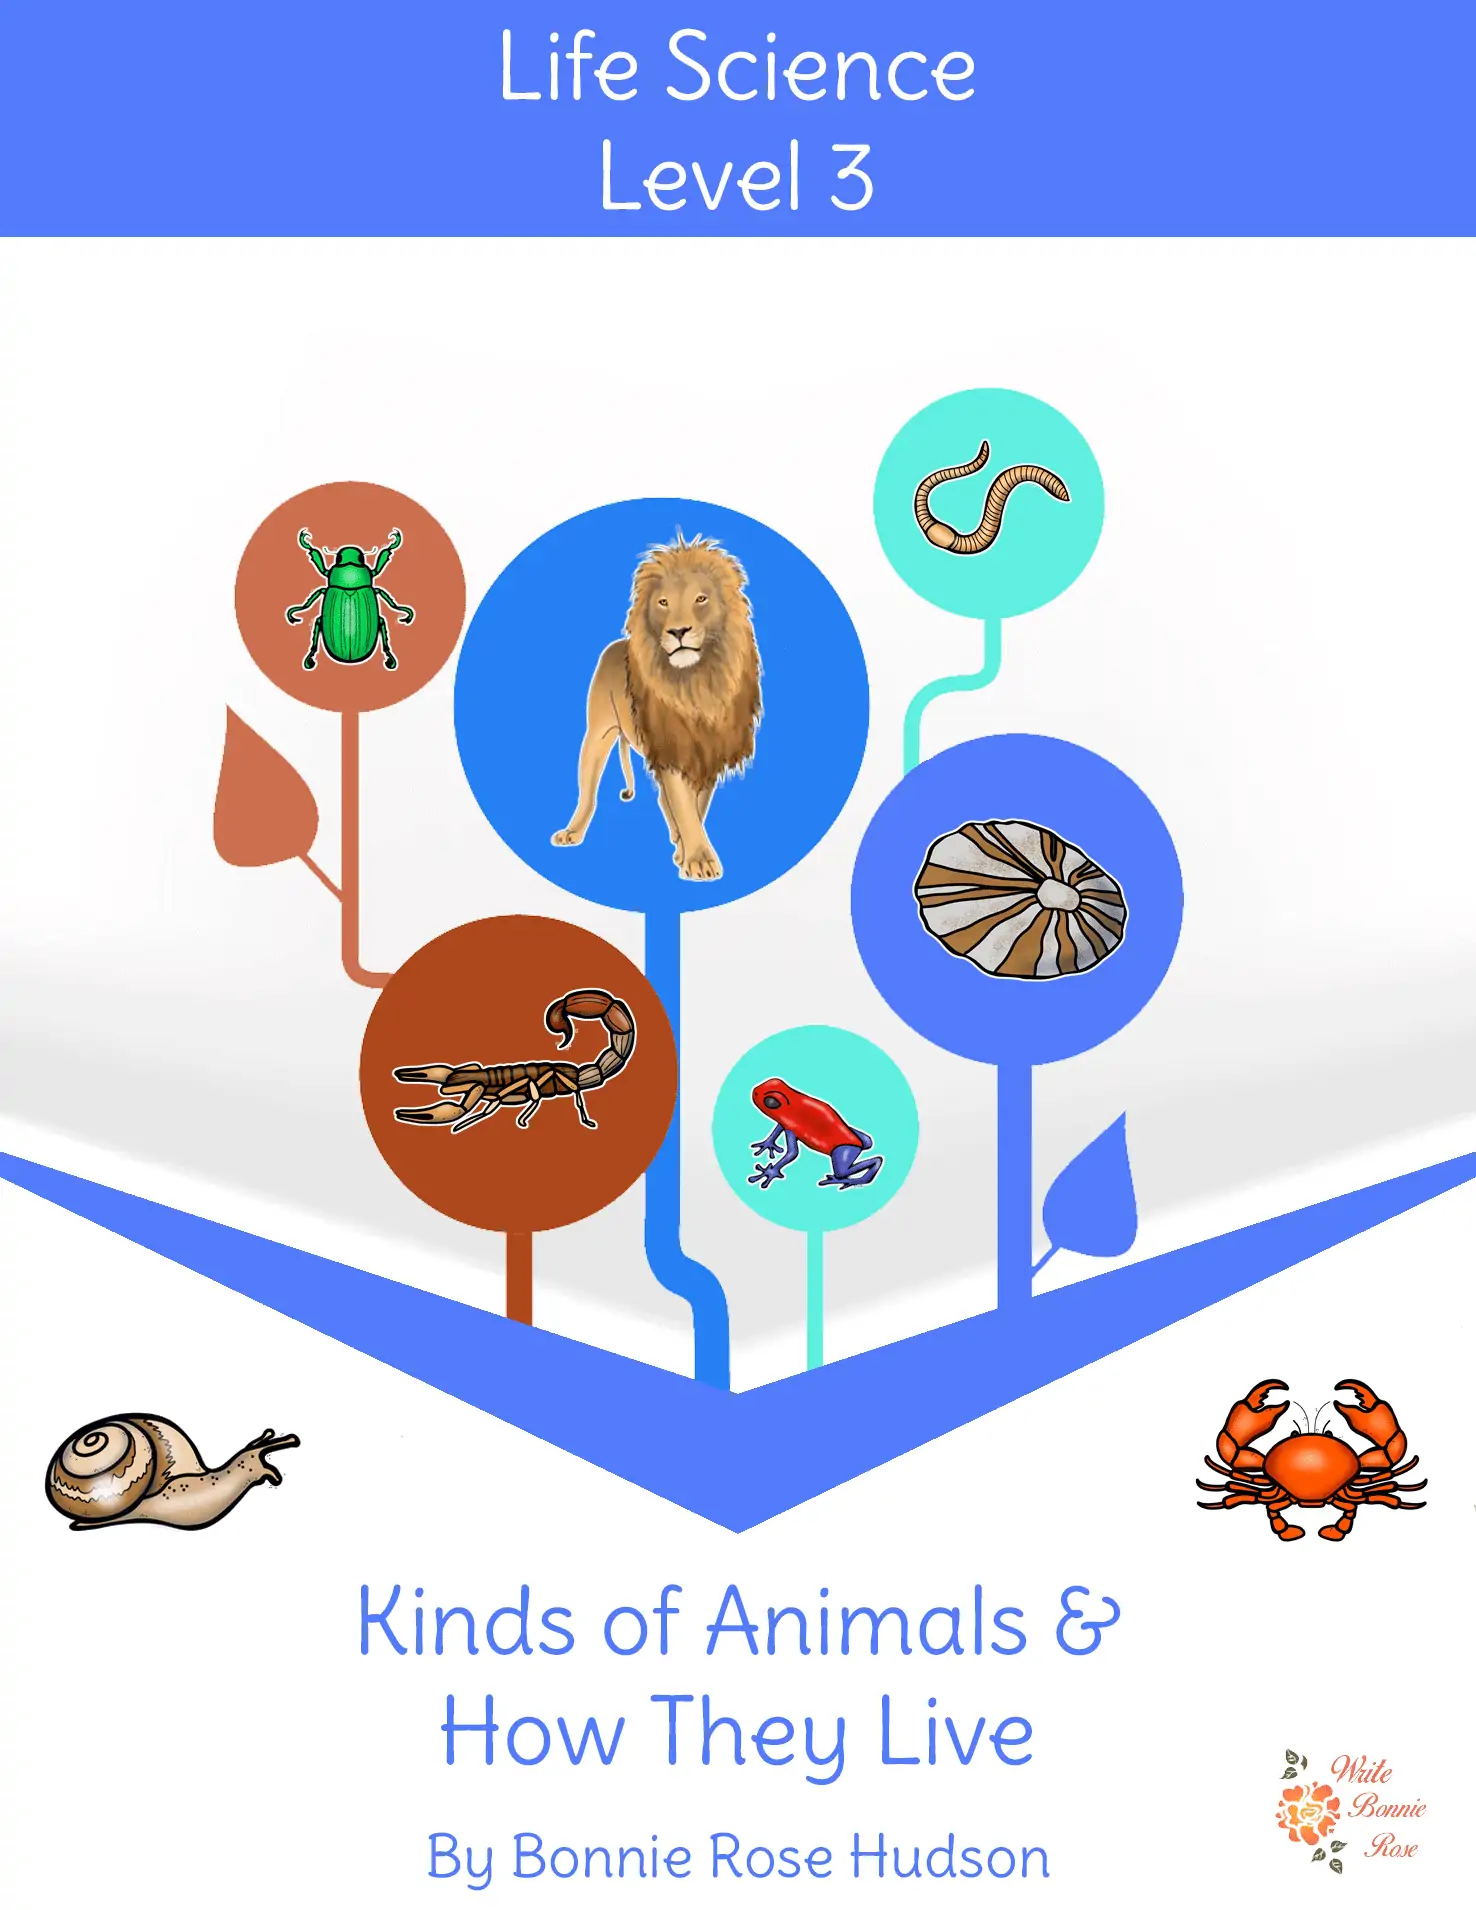 Kinds of Animals & How They Live children\'s science book